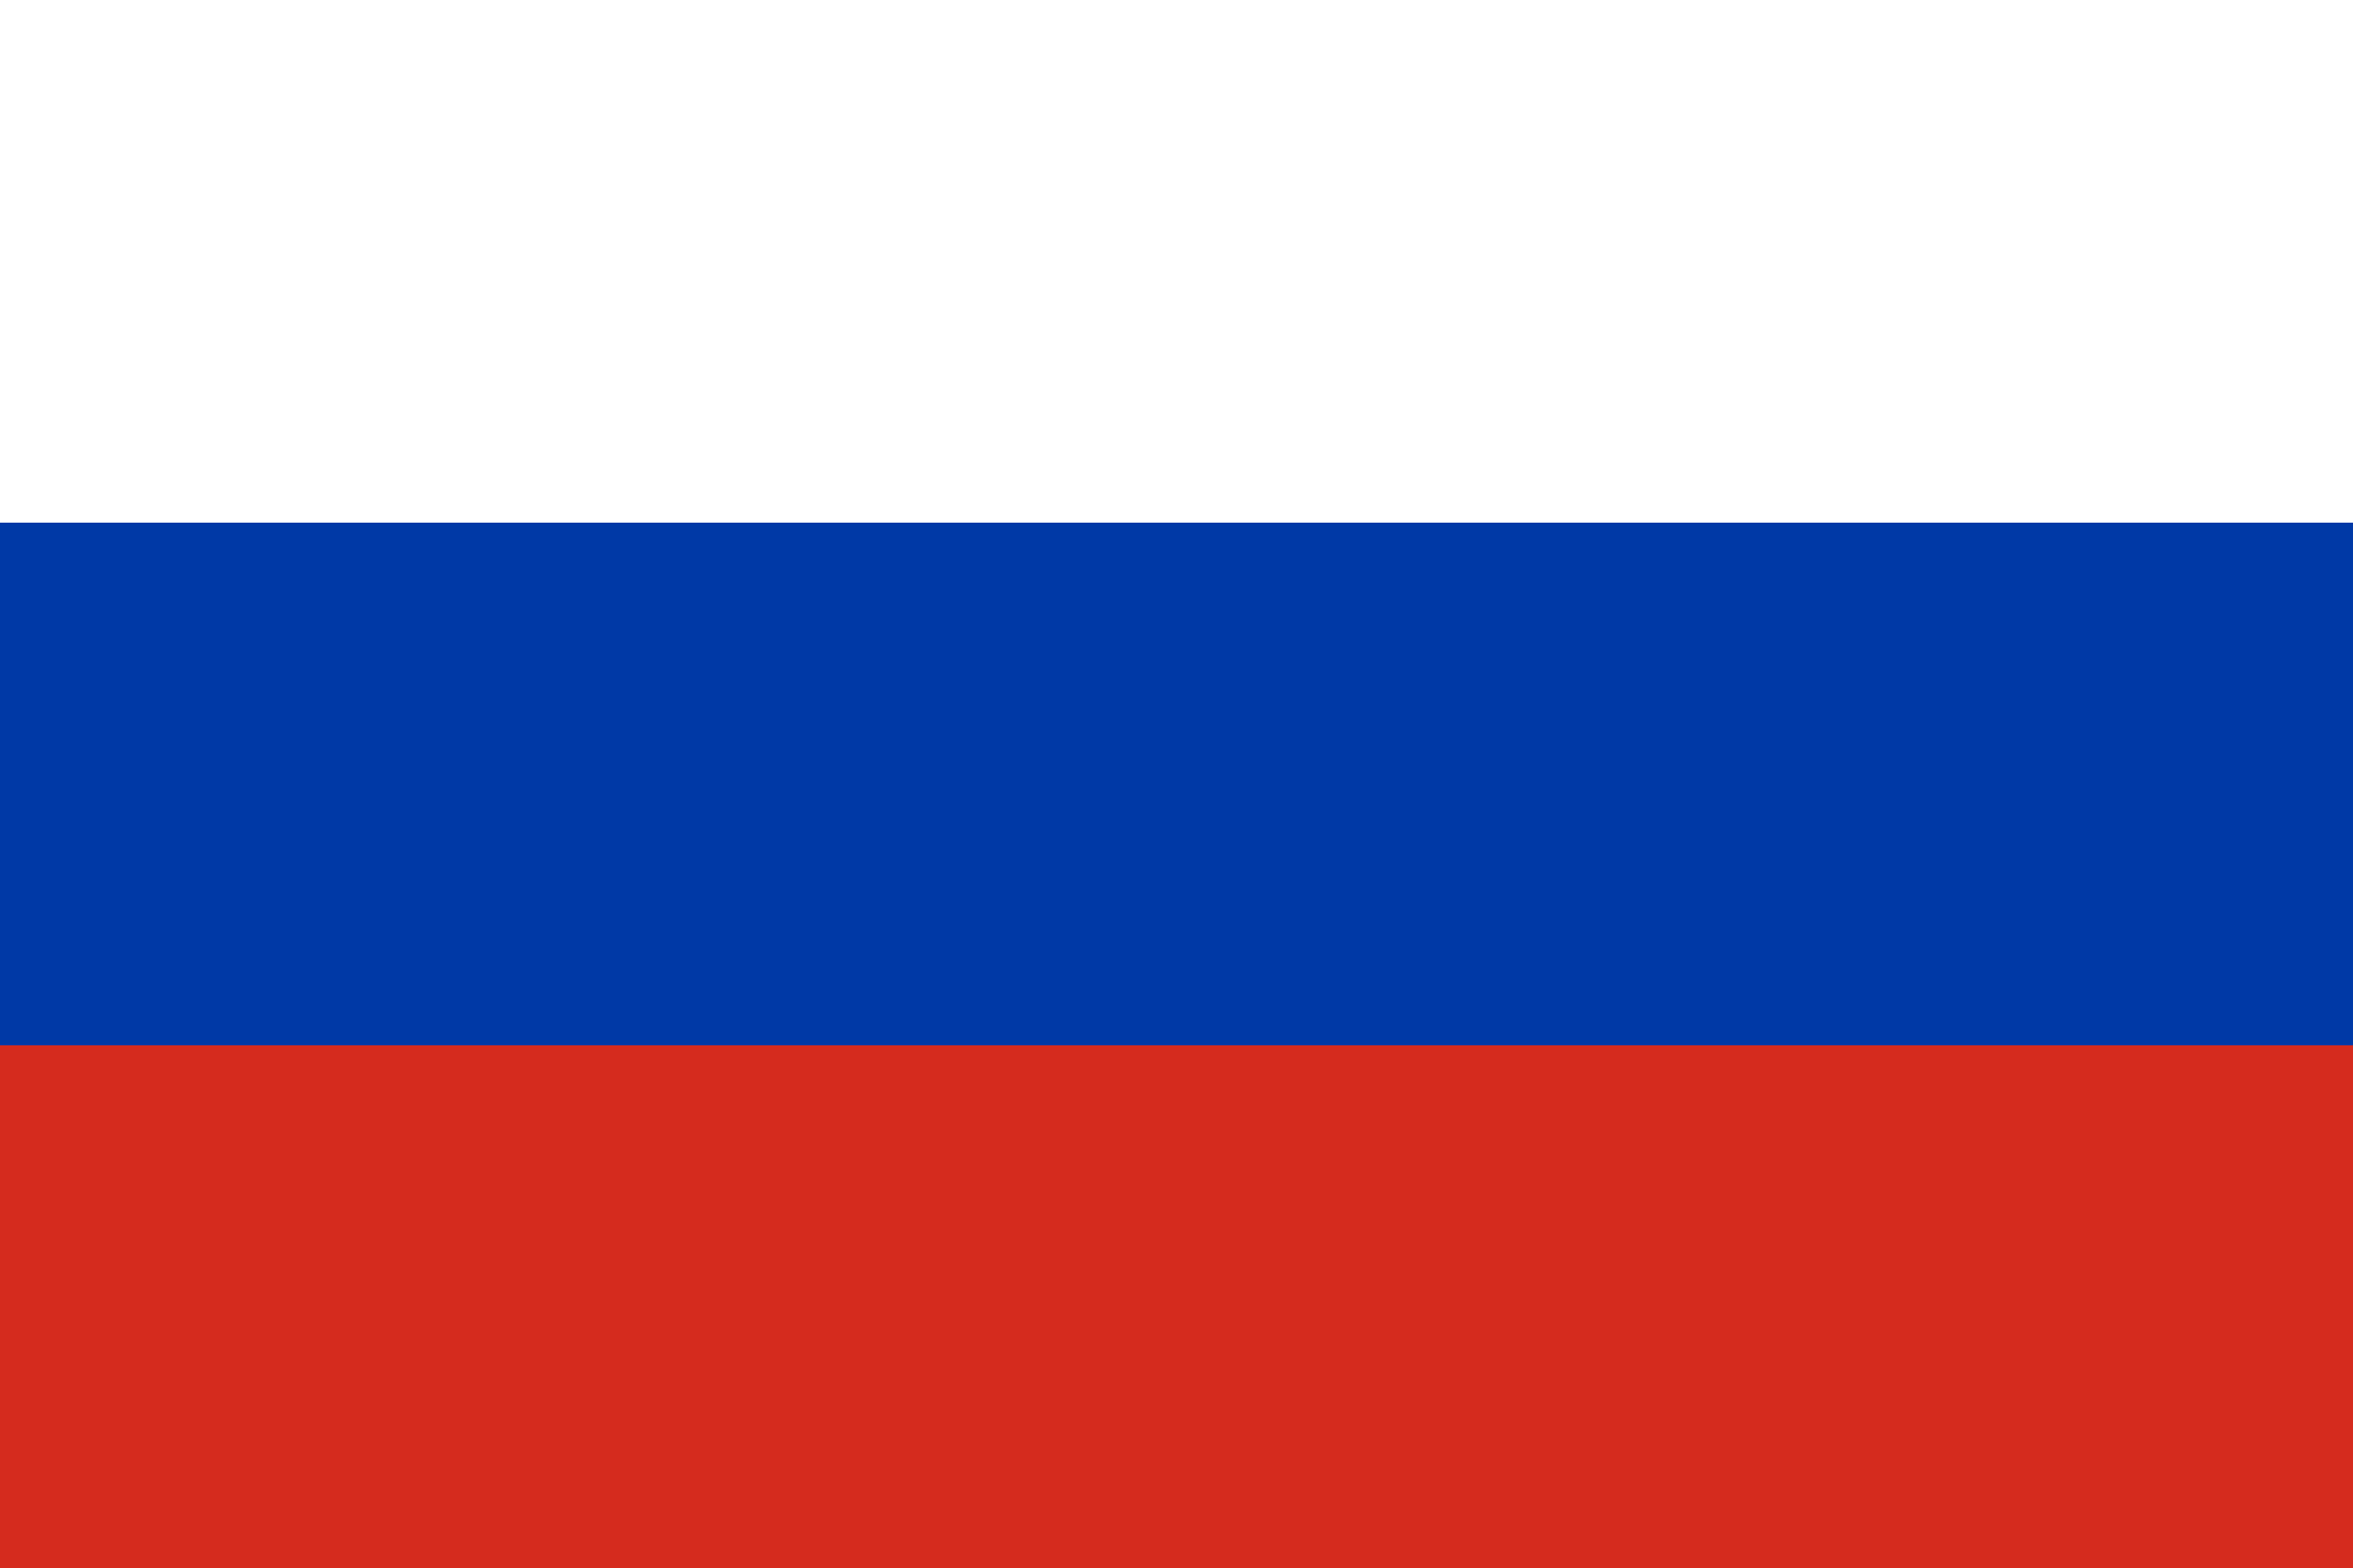 Russia Flag Image - Free Download